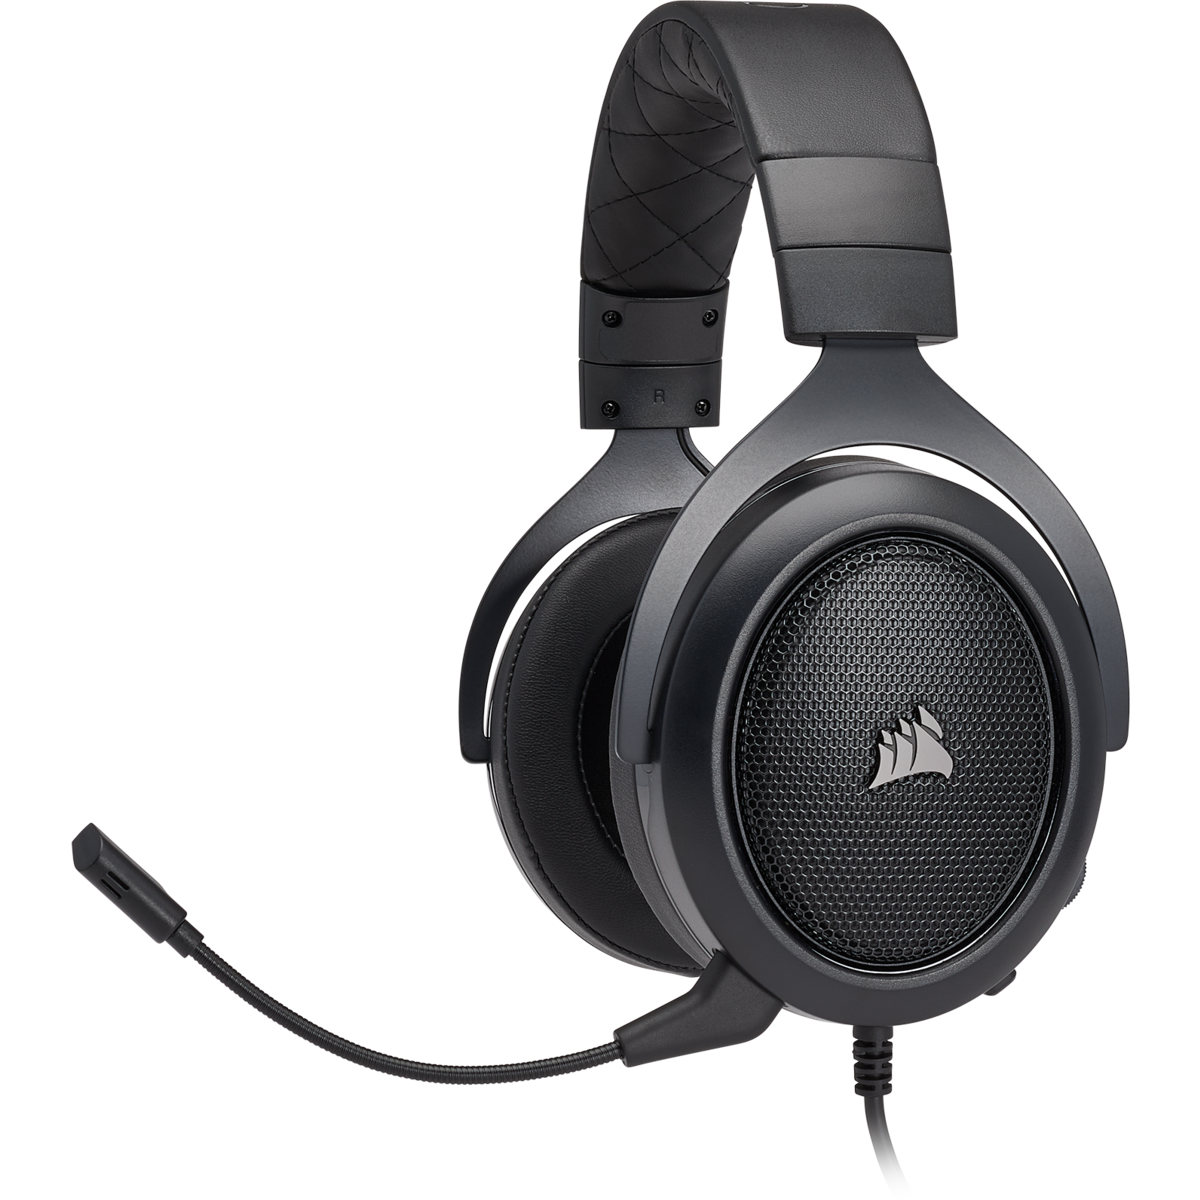 Corsair HS50 Stereo Gaming Headset, Carbon